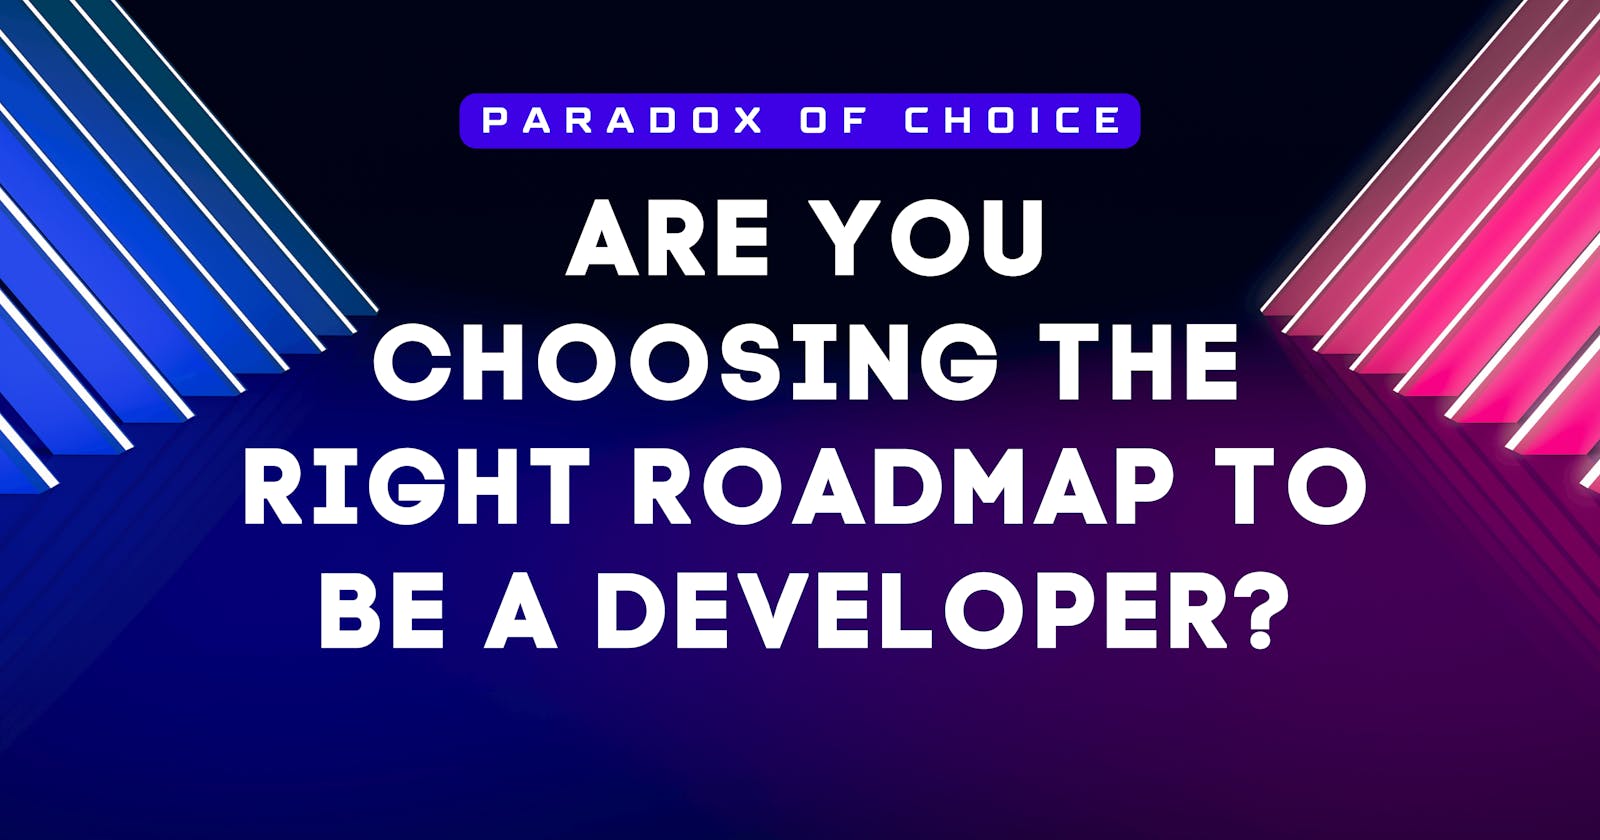 The Paradox of Choice - Are you choosing the right roadmap to be a developer?